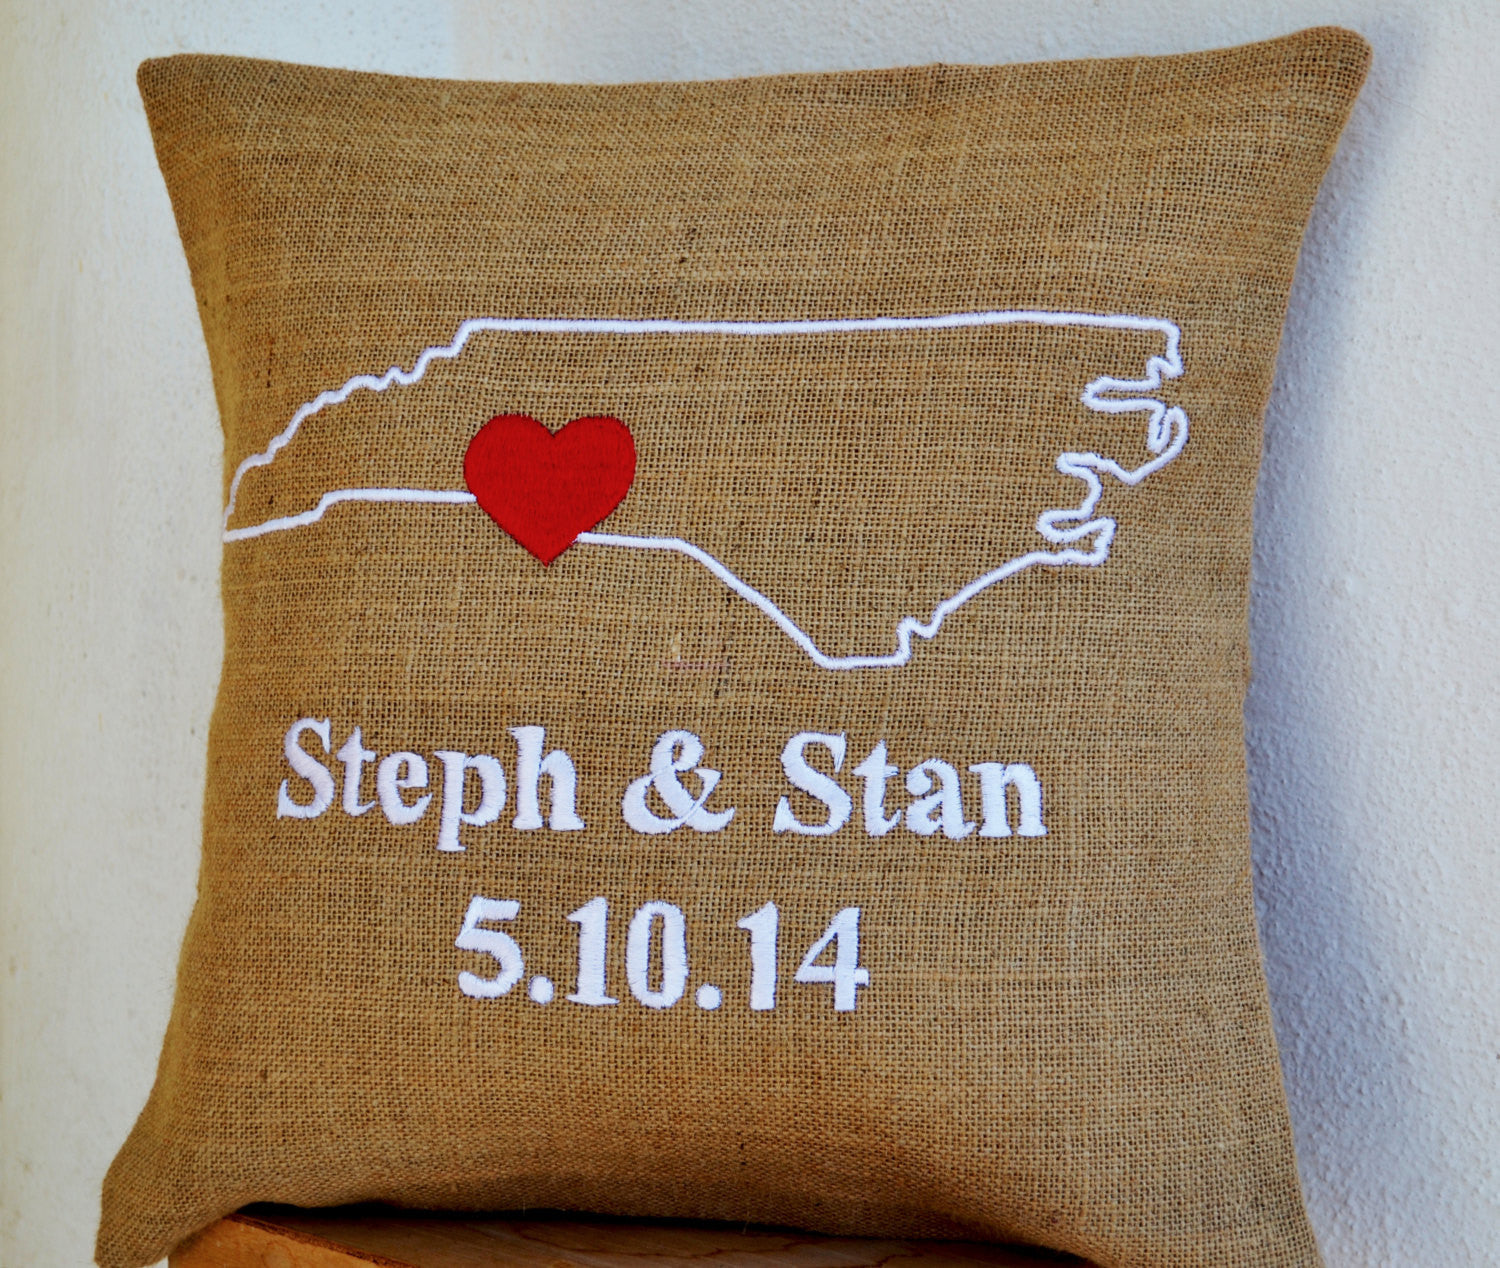 Handmade burlap pillow case with state embroidery